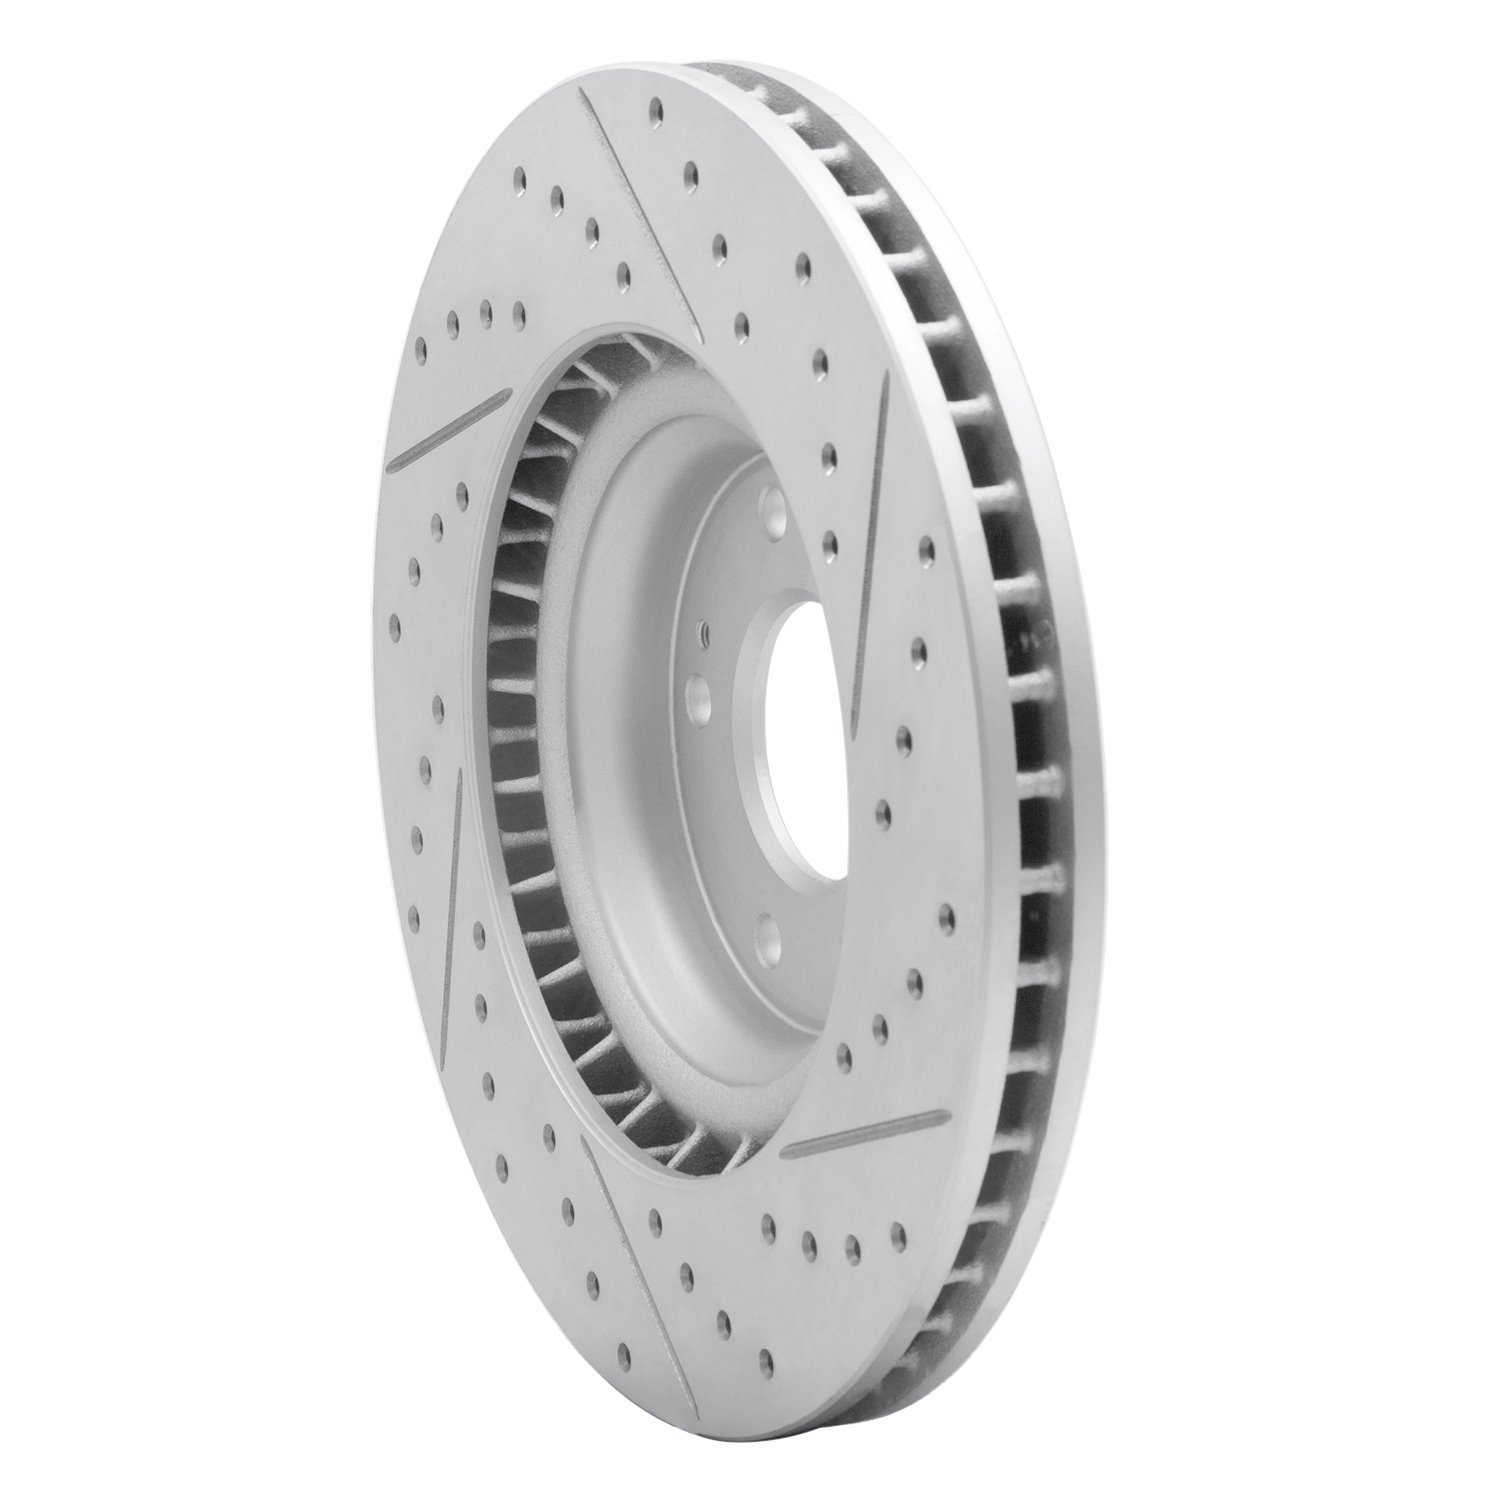 830-03064L Geoperformance Drilled/Slotted Brake Rotor, Fits Select Kia/Hyundai/Genesis, Position: Front Left